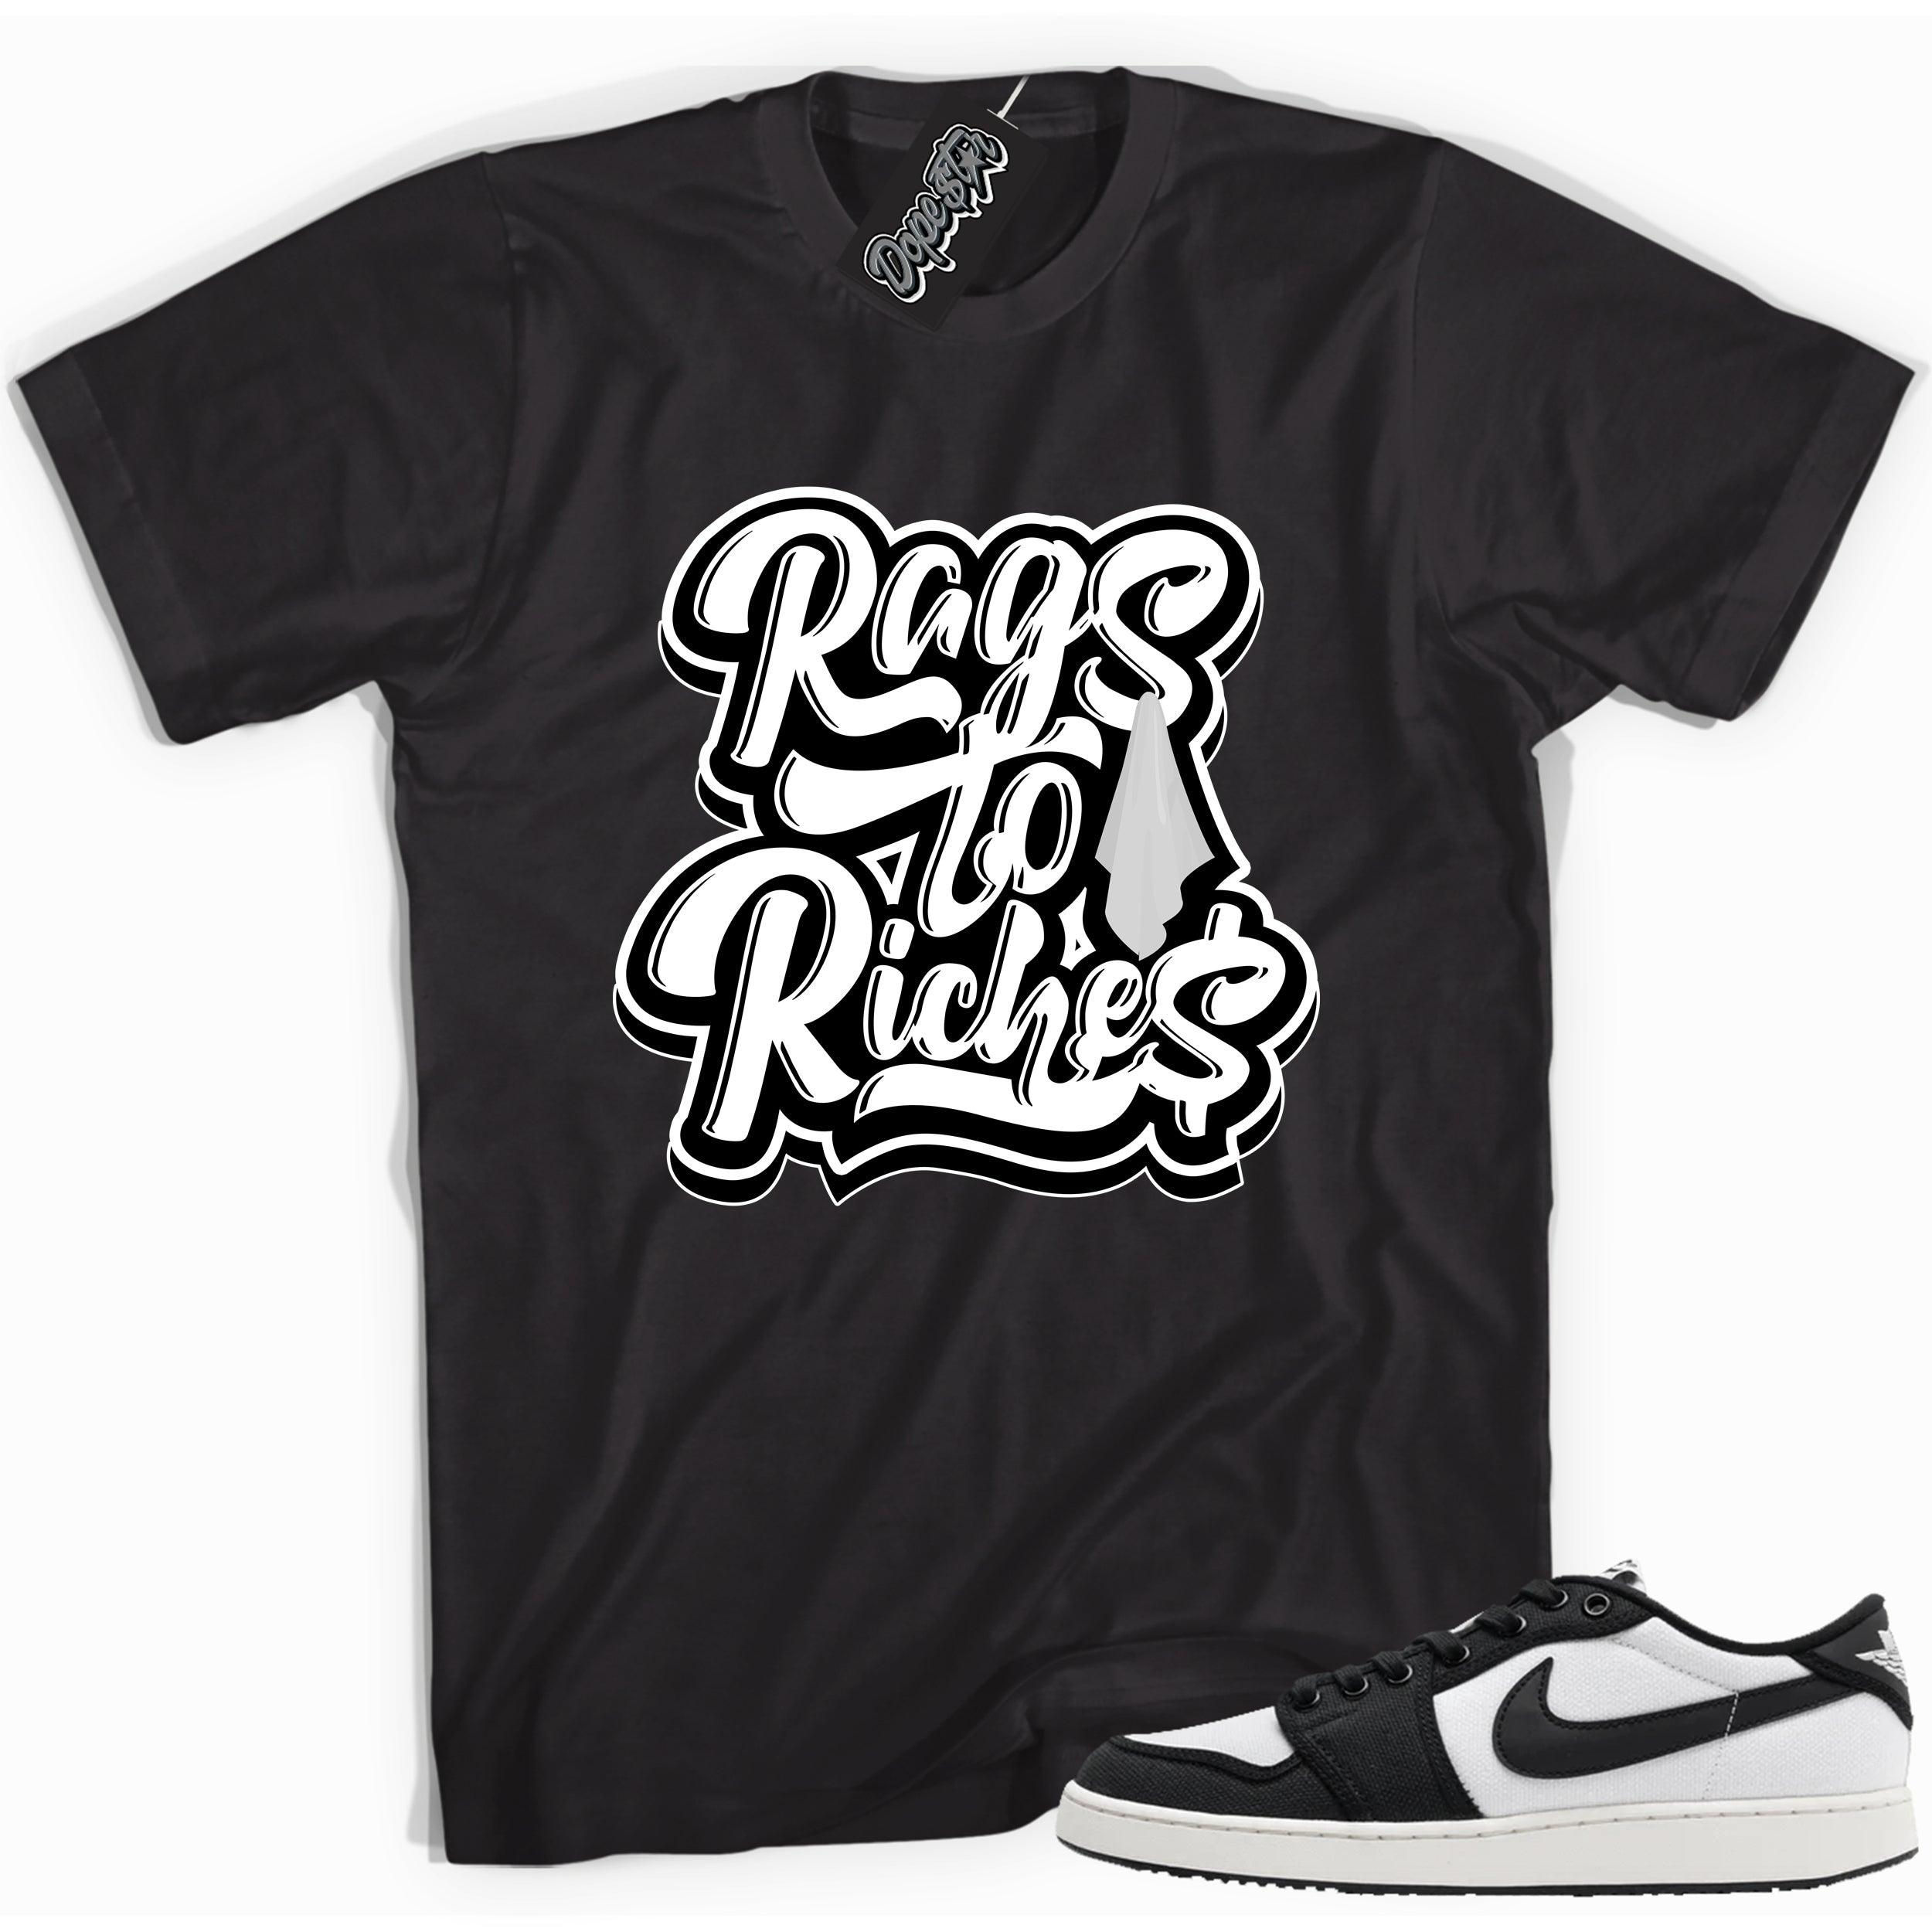 Cool black graphic tee with 'rags to riches' print, that perfectly matches Air Jordan 1 Retro Ajko Low Black & White sneakers.